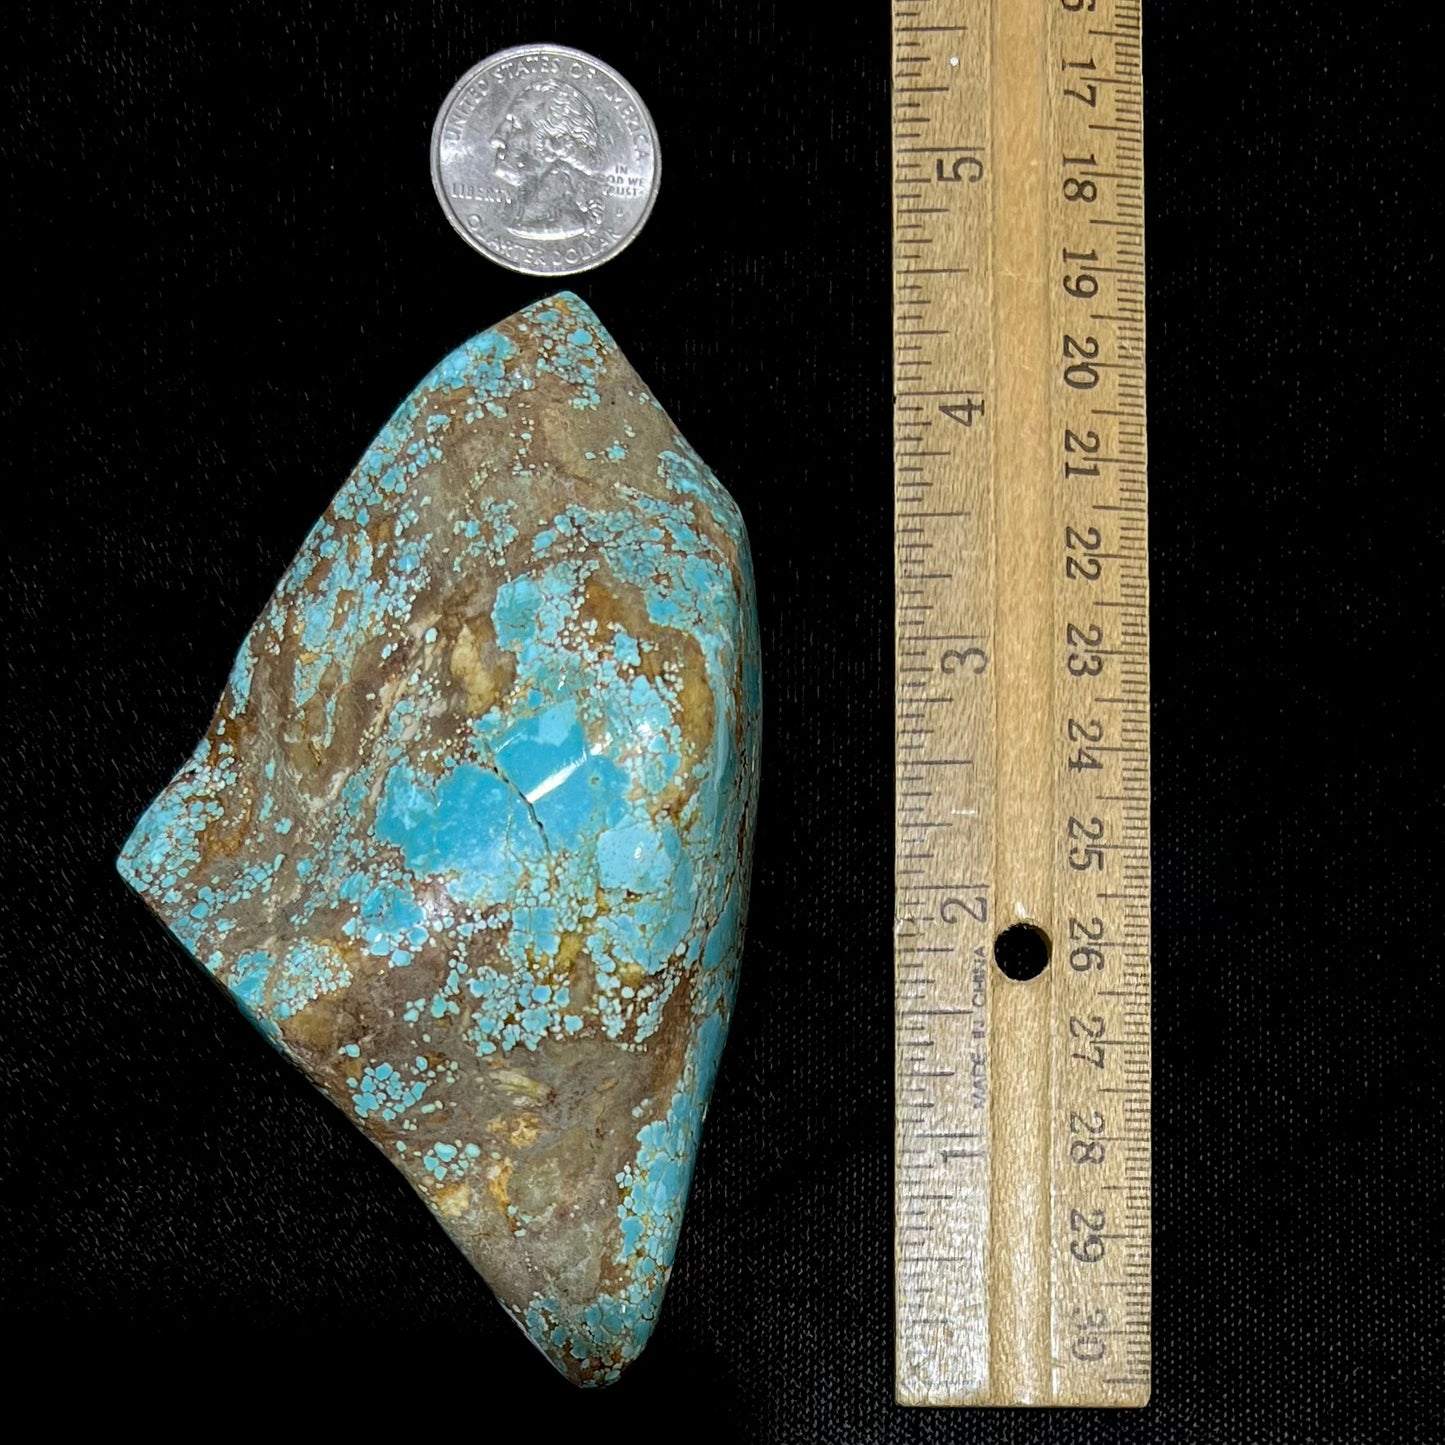 A polished Cripple Creek turquoise nugget from Teller County, Colorado.